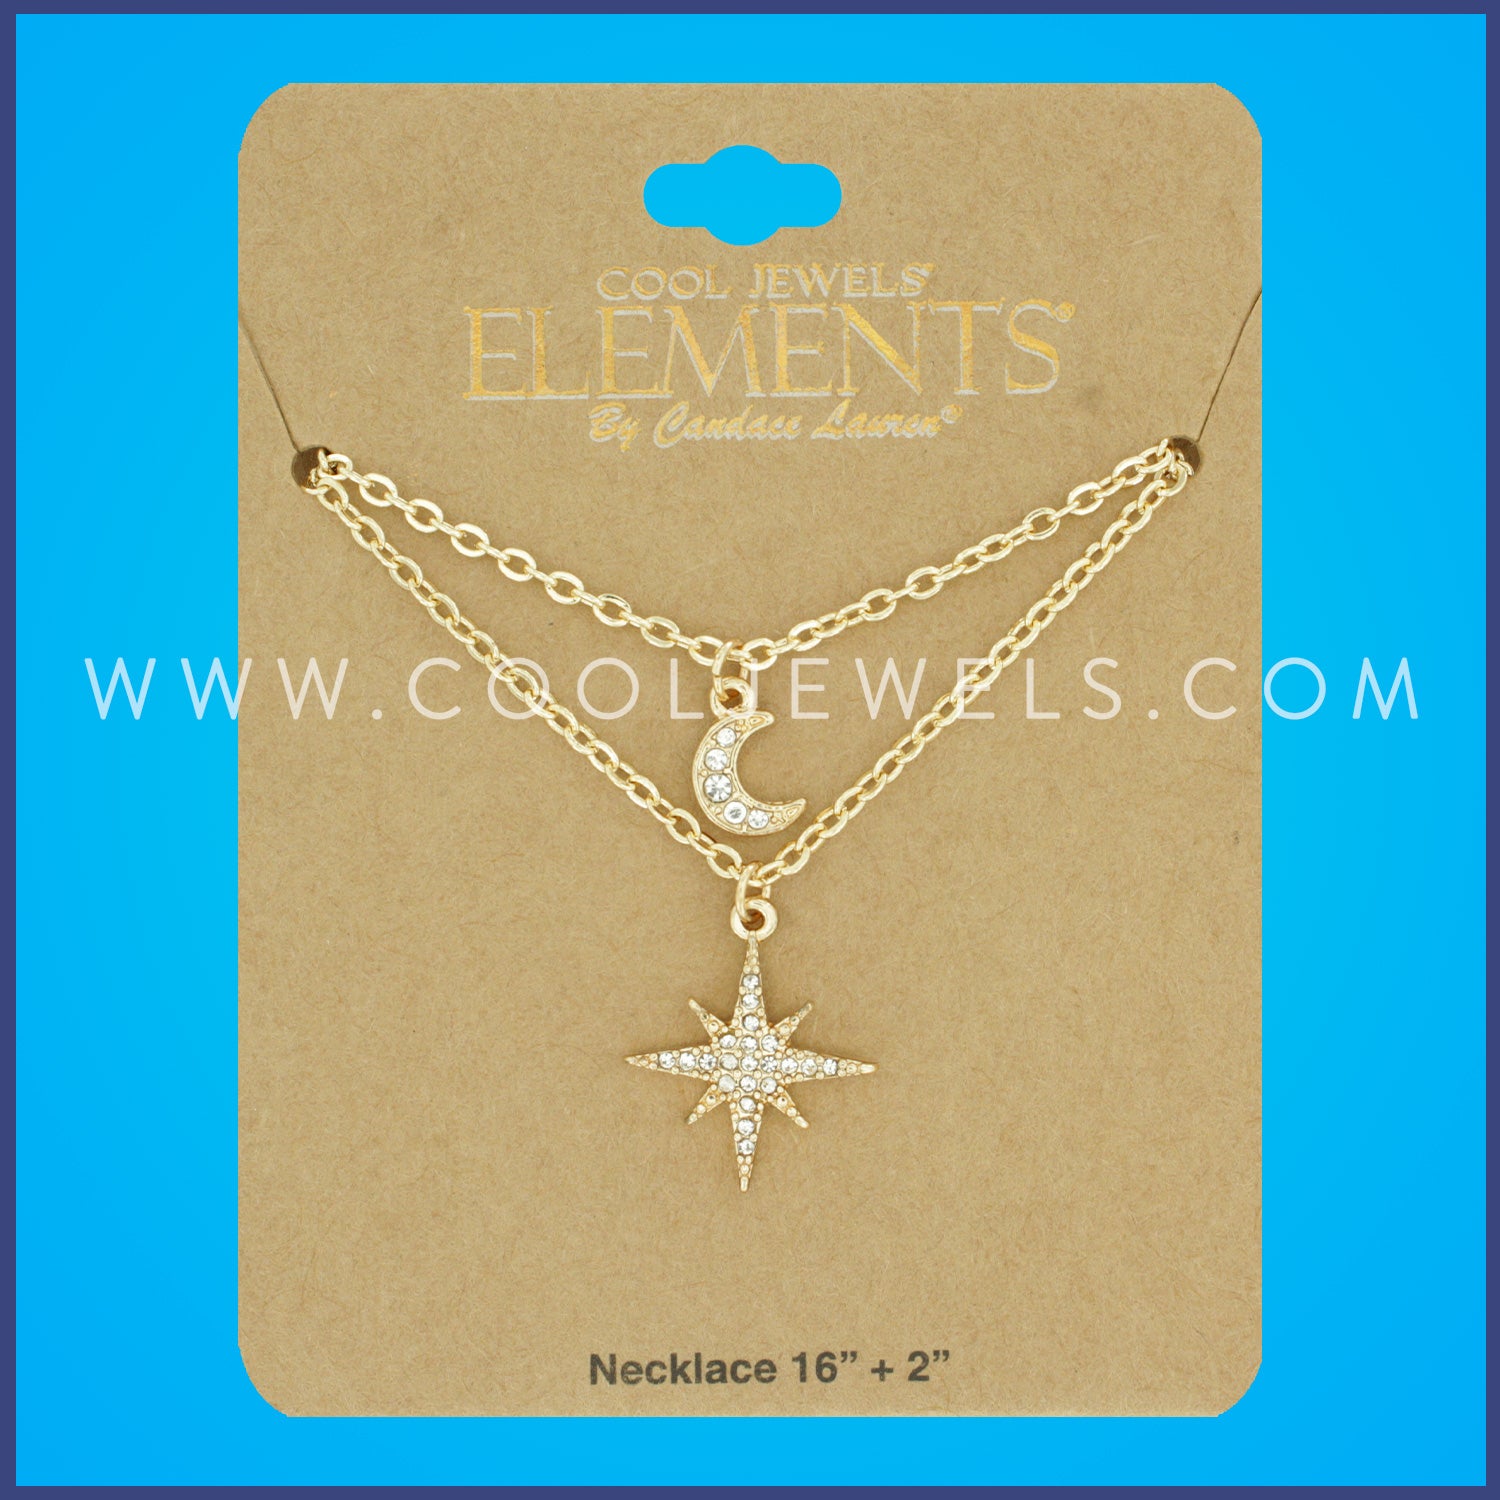 GOLD DOUBLE LAYERED CHAIN NECKLACE WITH RHINESTONE MOON & 8-POINT STAR PENDANT - CARDED